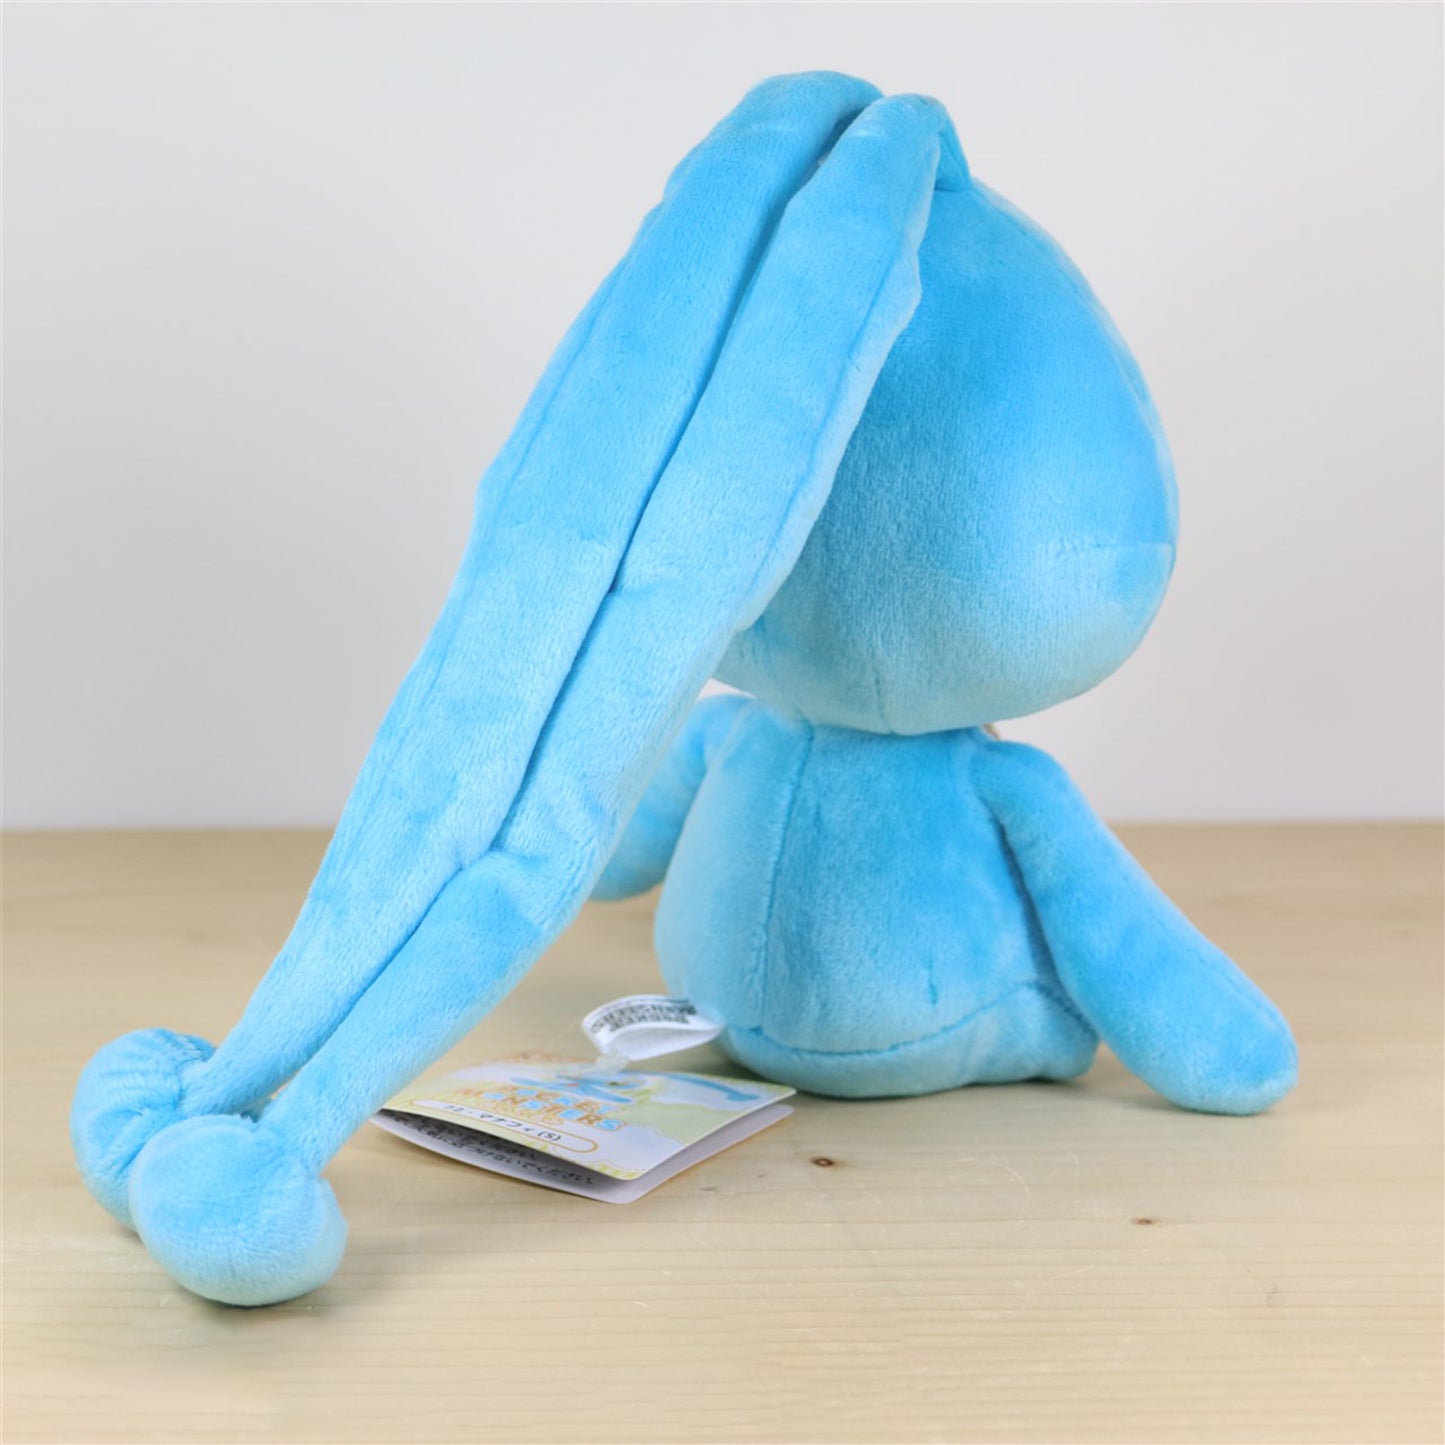 Manaphy All Star Collection Pokemon Plush